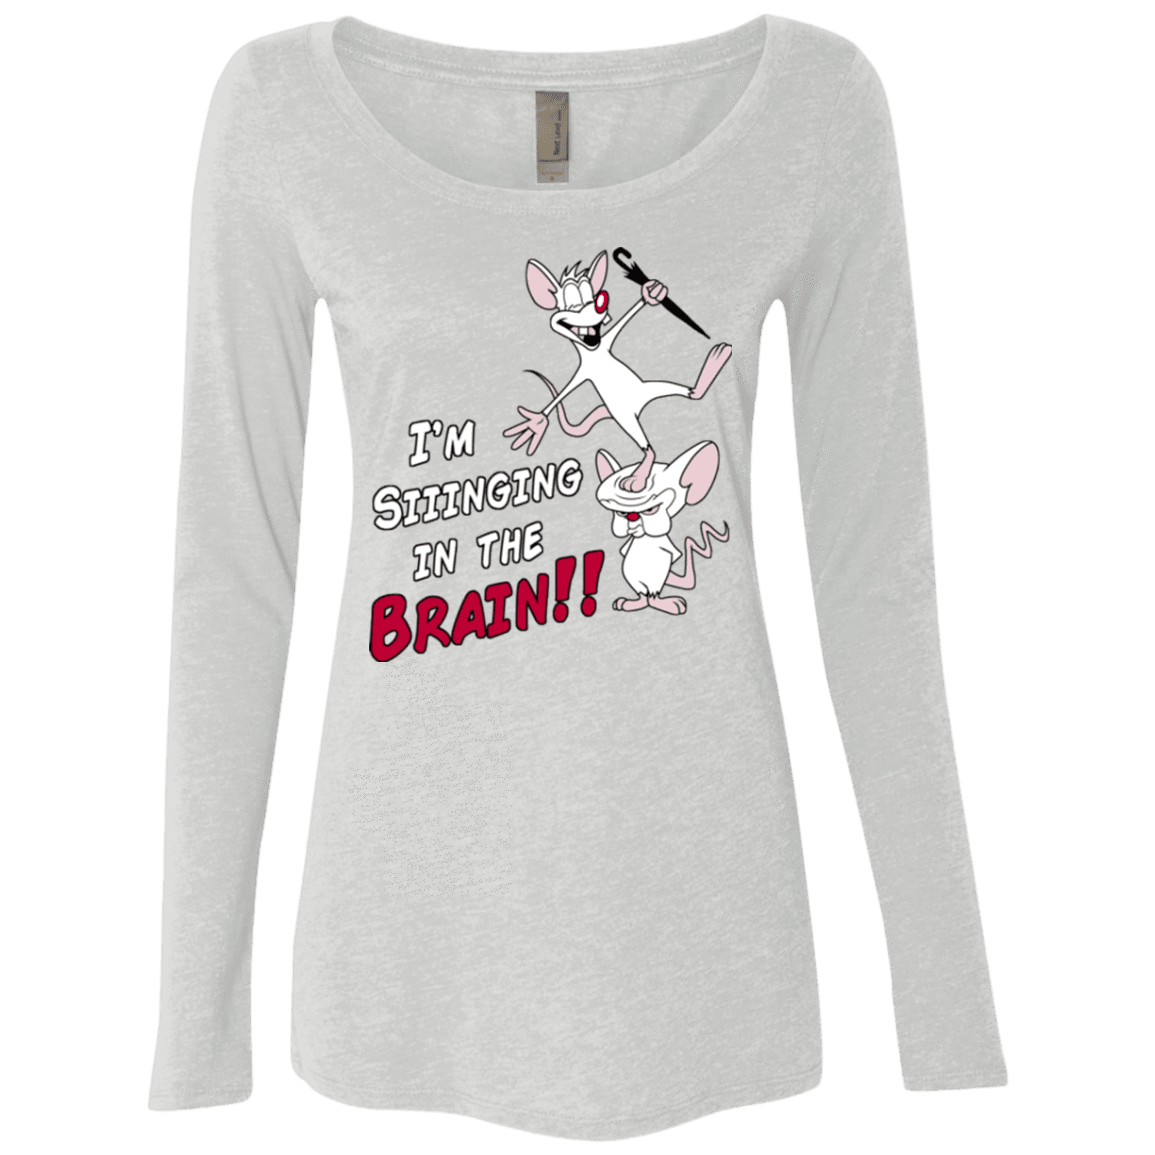 T-Shirts Heather White / S Singing In The Brain Women's Triblend Long Sleeve Shirt